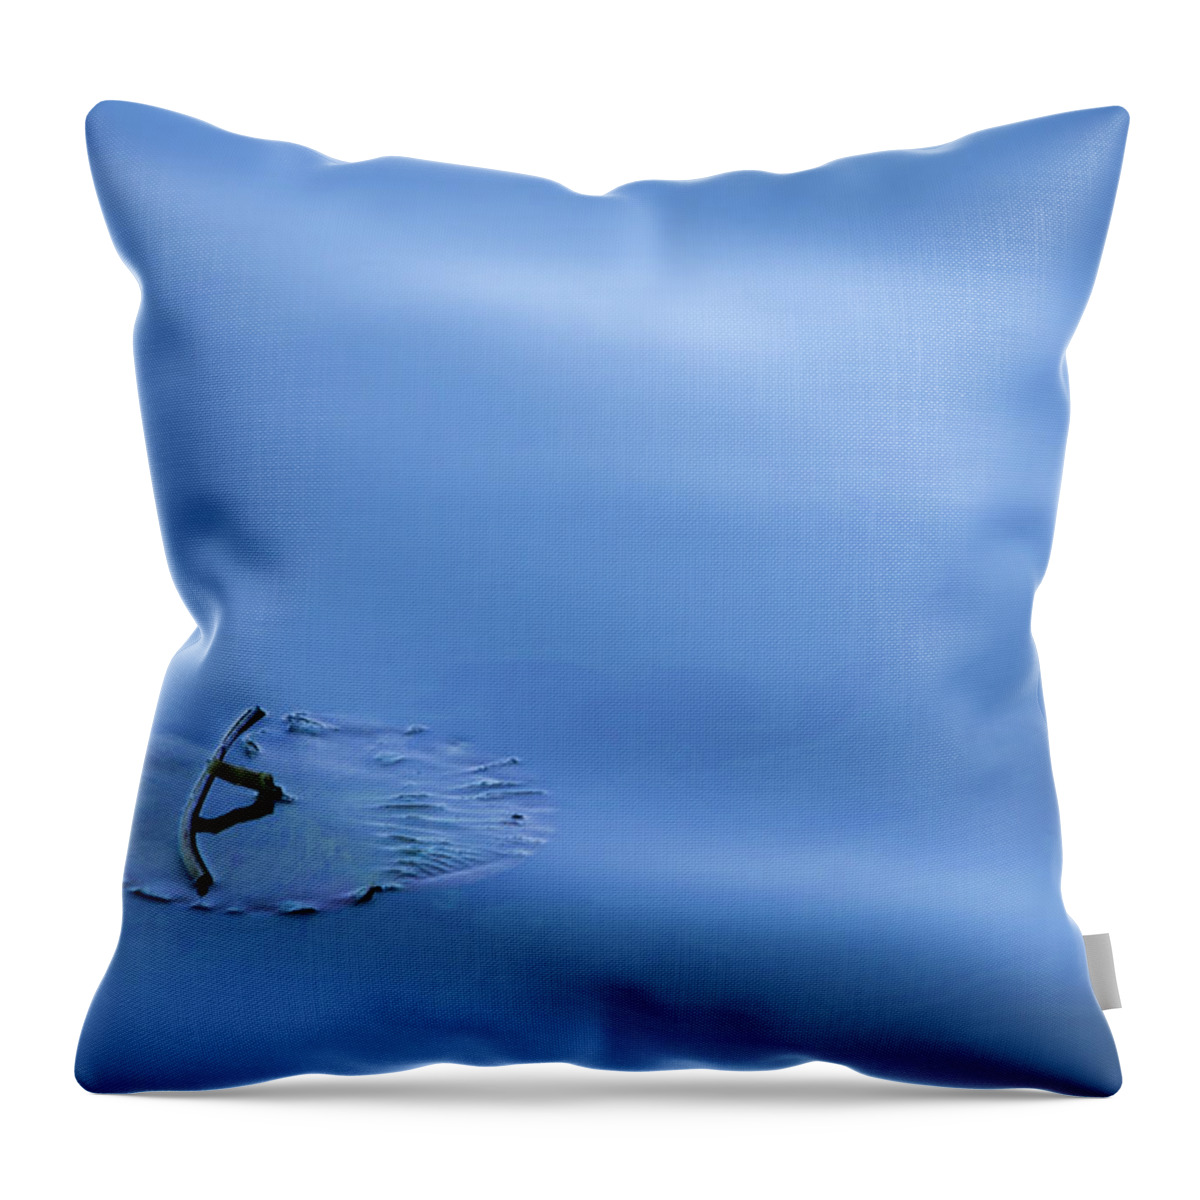 Appleton Throw Pillow featuring the photograph Float On by Lauri Novak